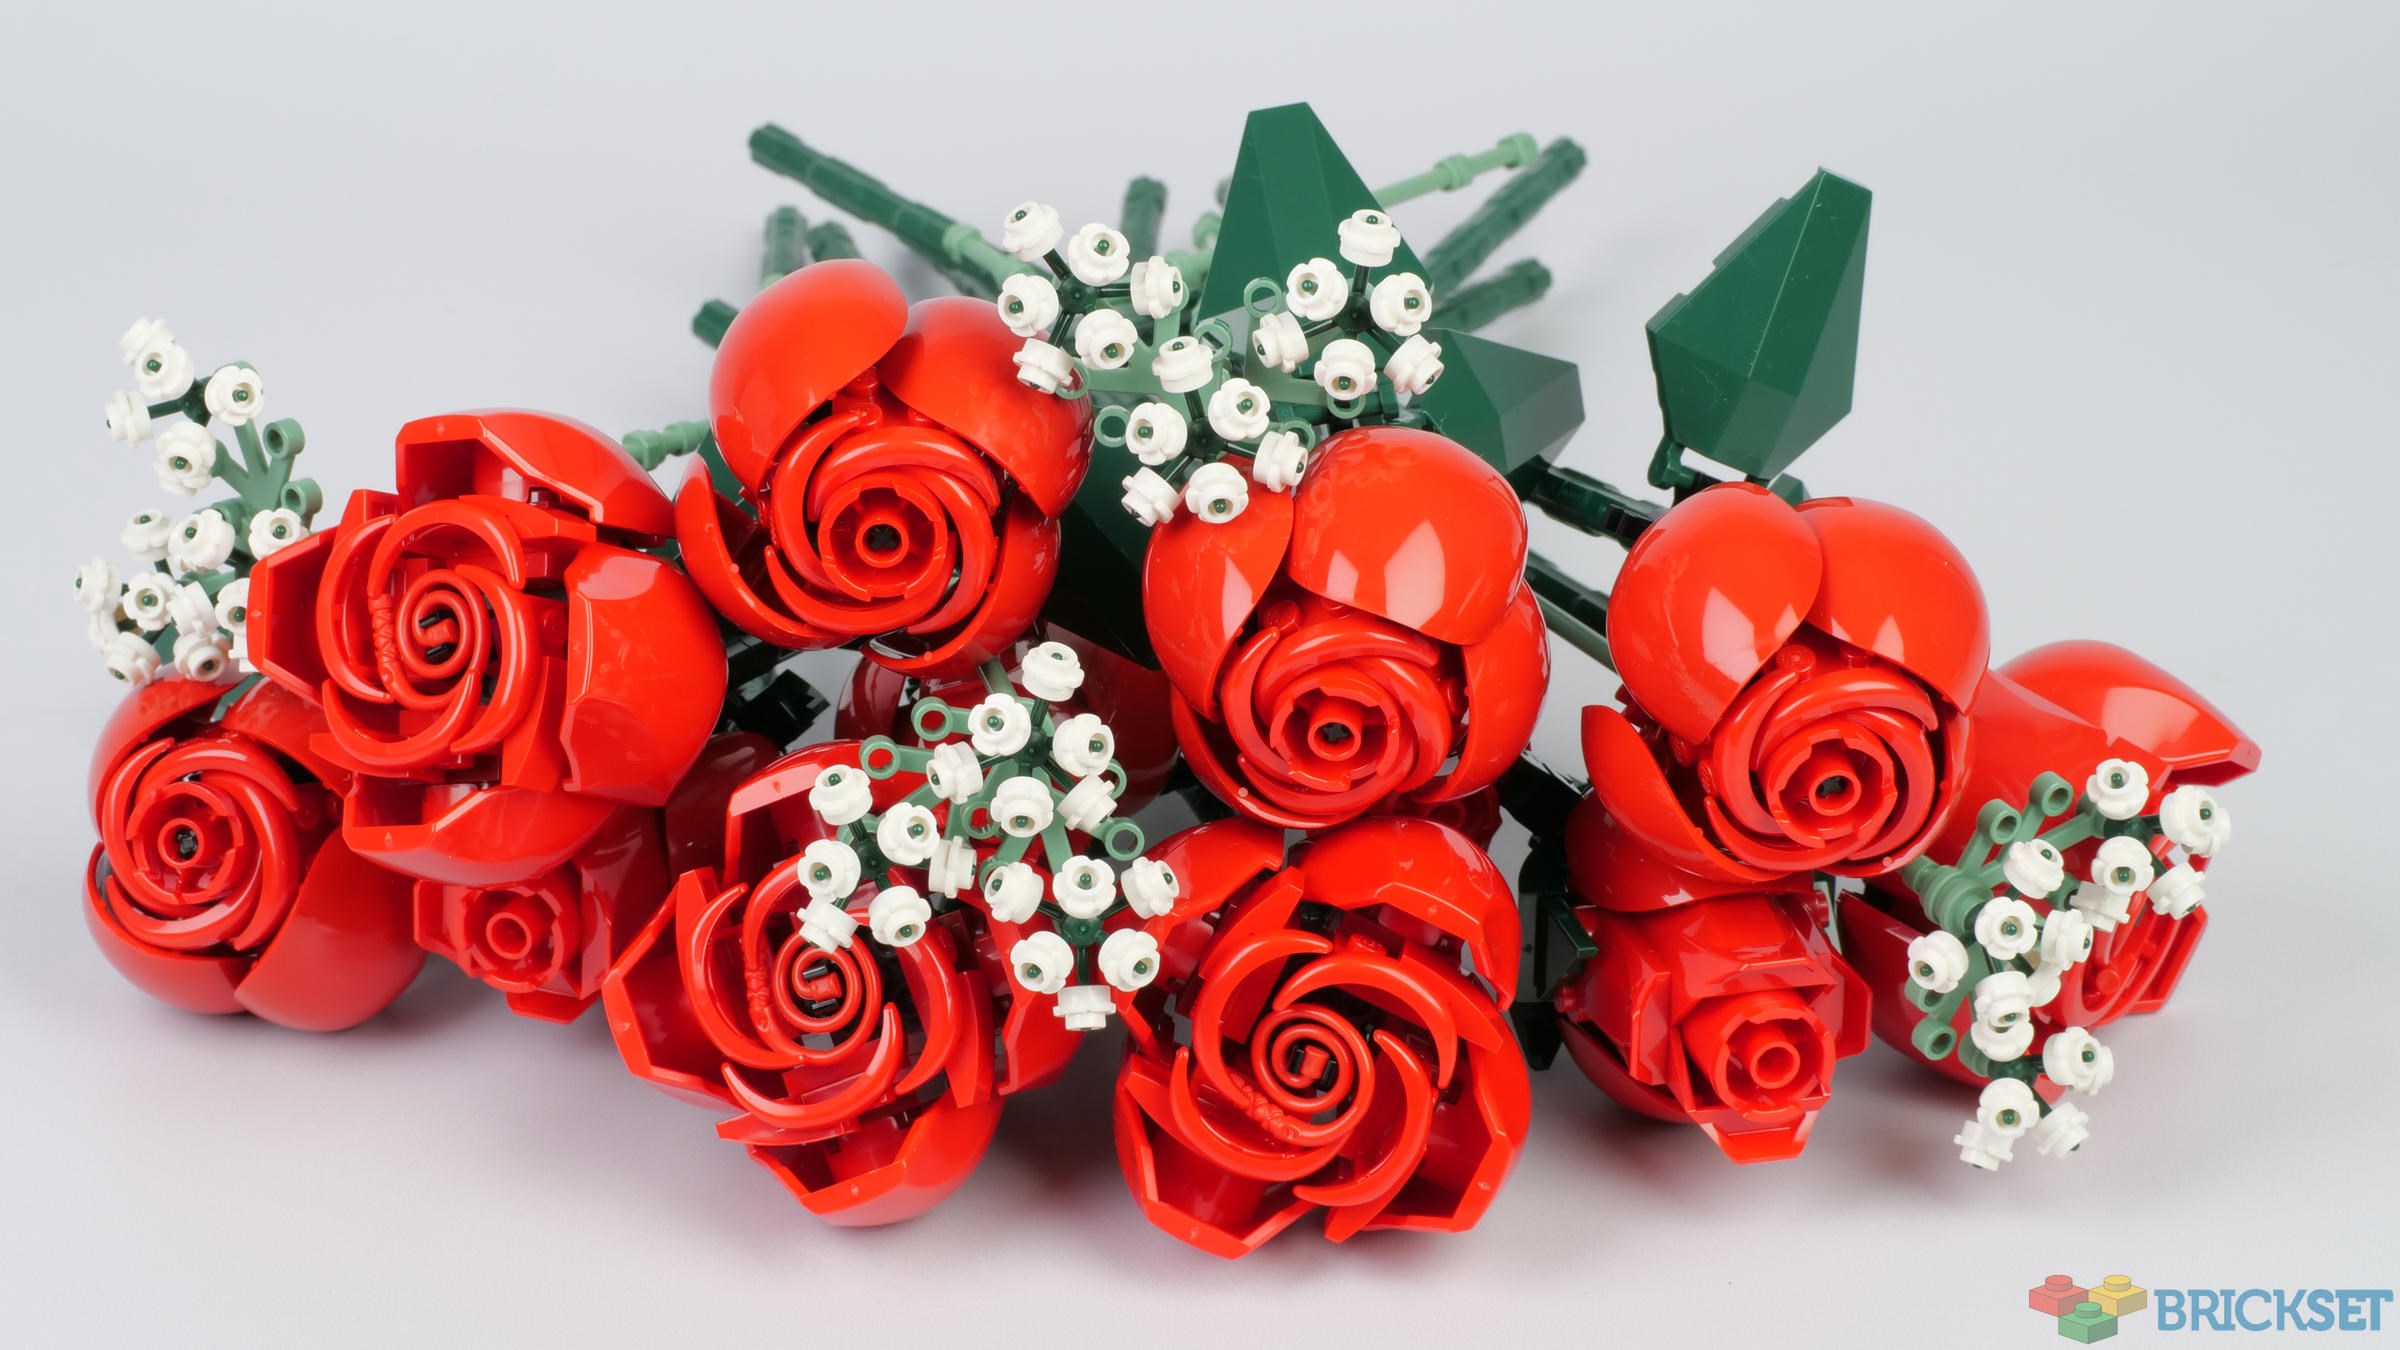 LEGO Roses Set Brings the Ultimate Bouquet to Its Botanical